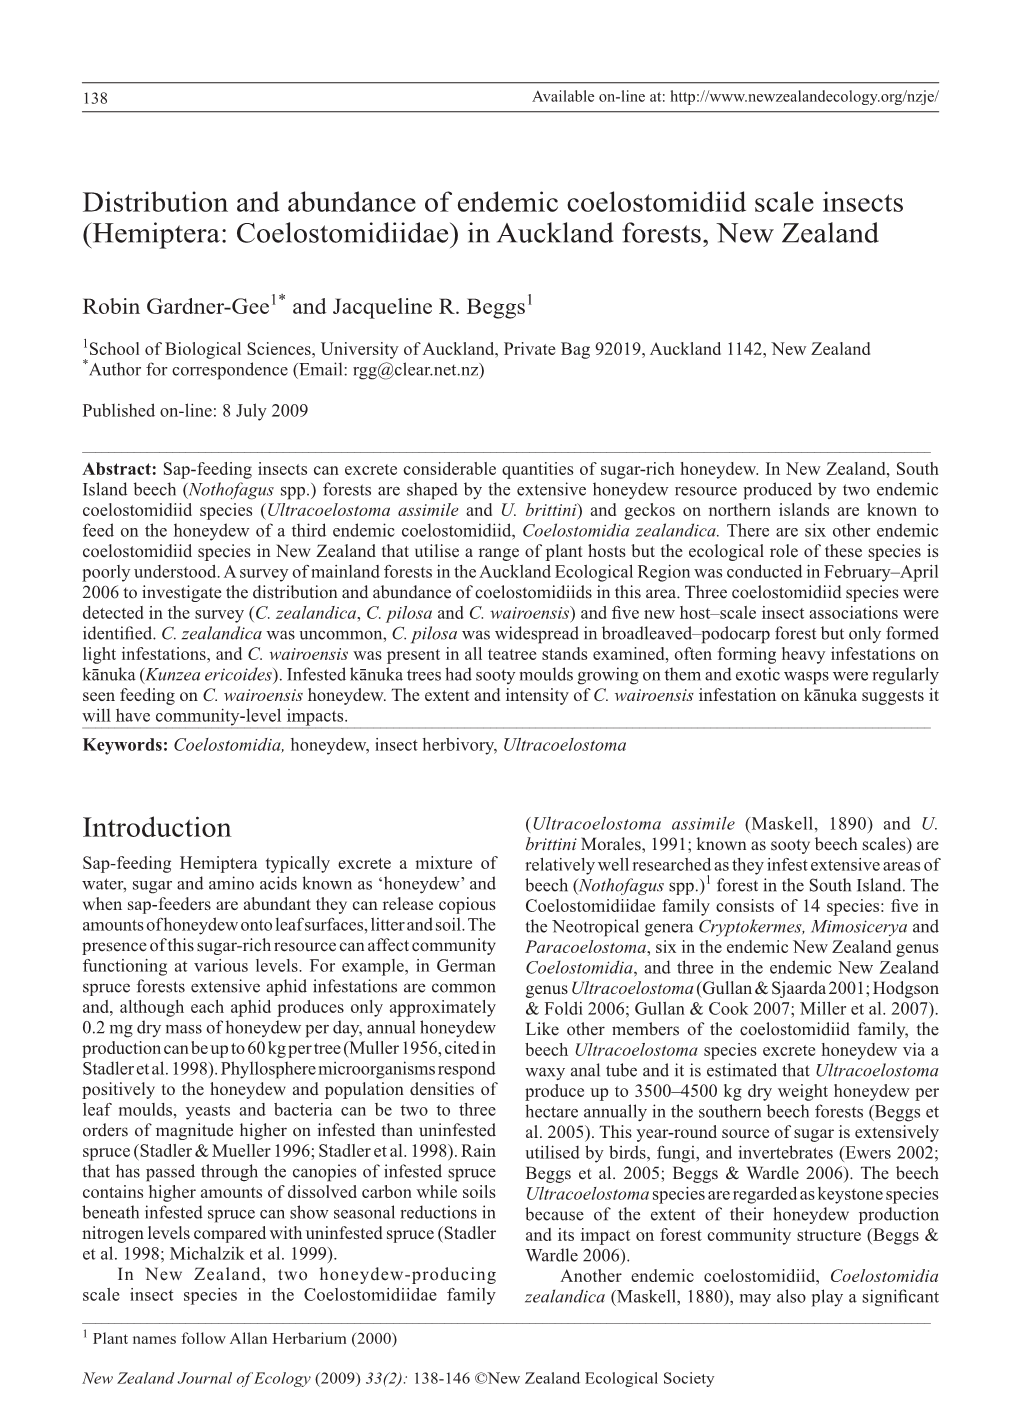 Distribution and Abundance of Endemic Coelostomidiid Scale Insects (Hemiptera: Coelostomidiidae) in Auckland Forests, New Zealand